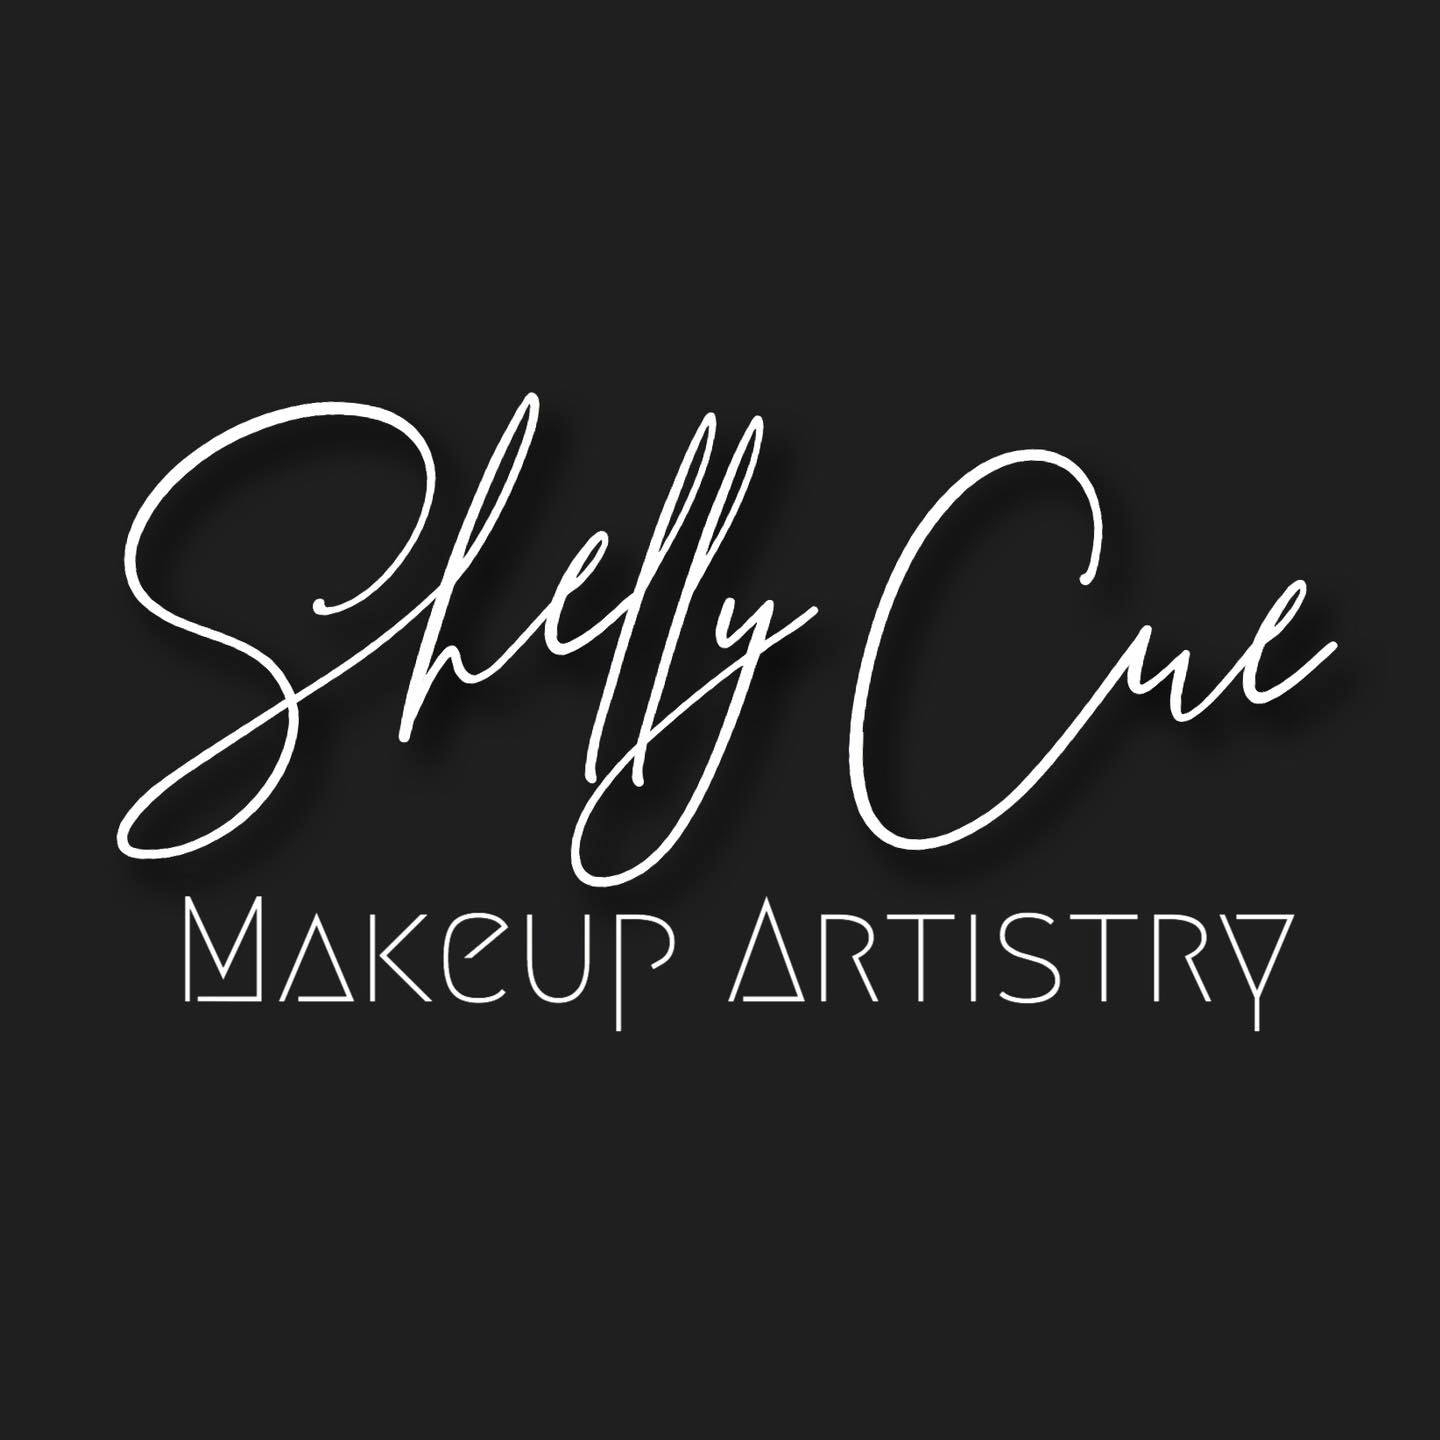 Shelly Cue Makeup Artistry Logo